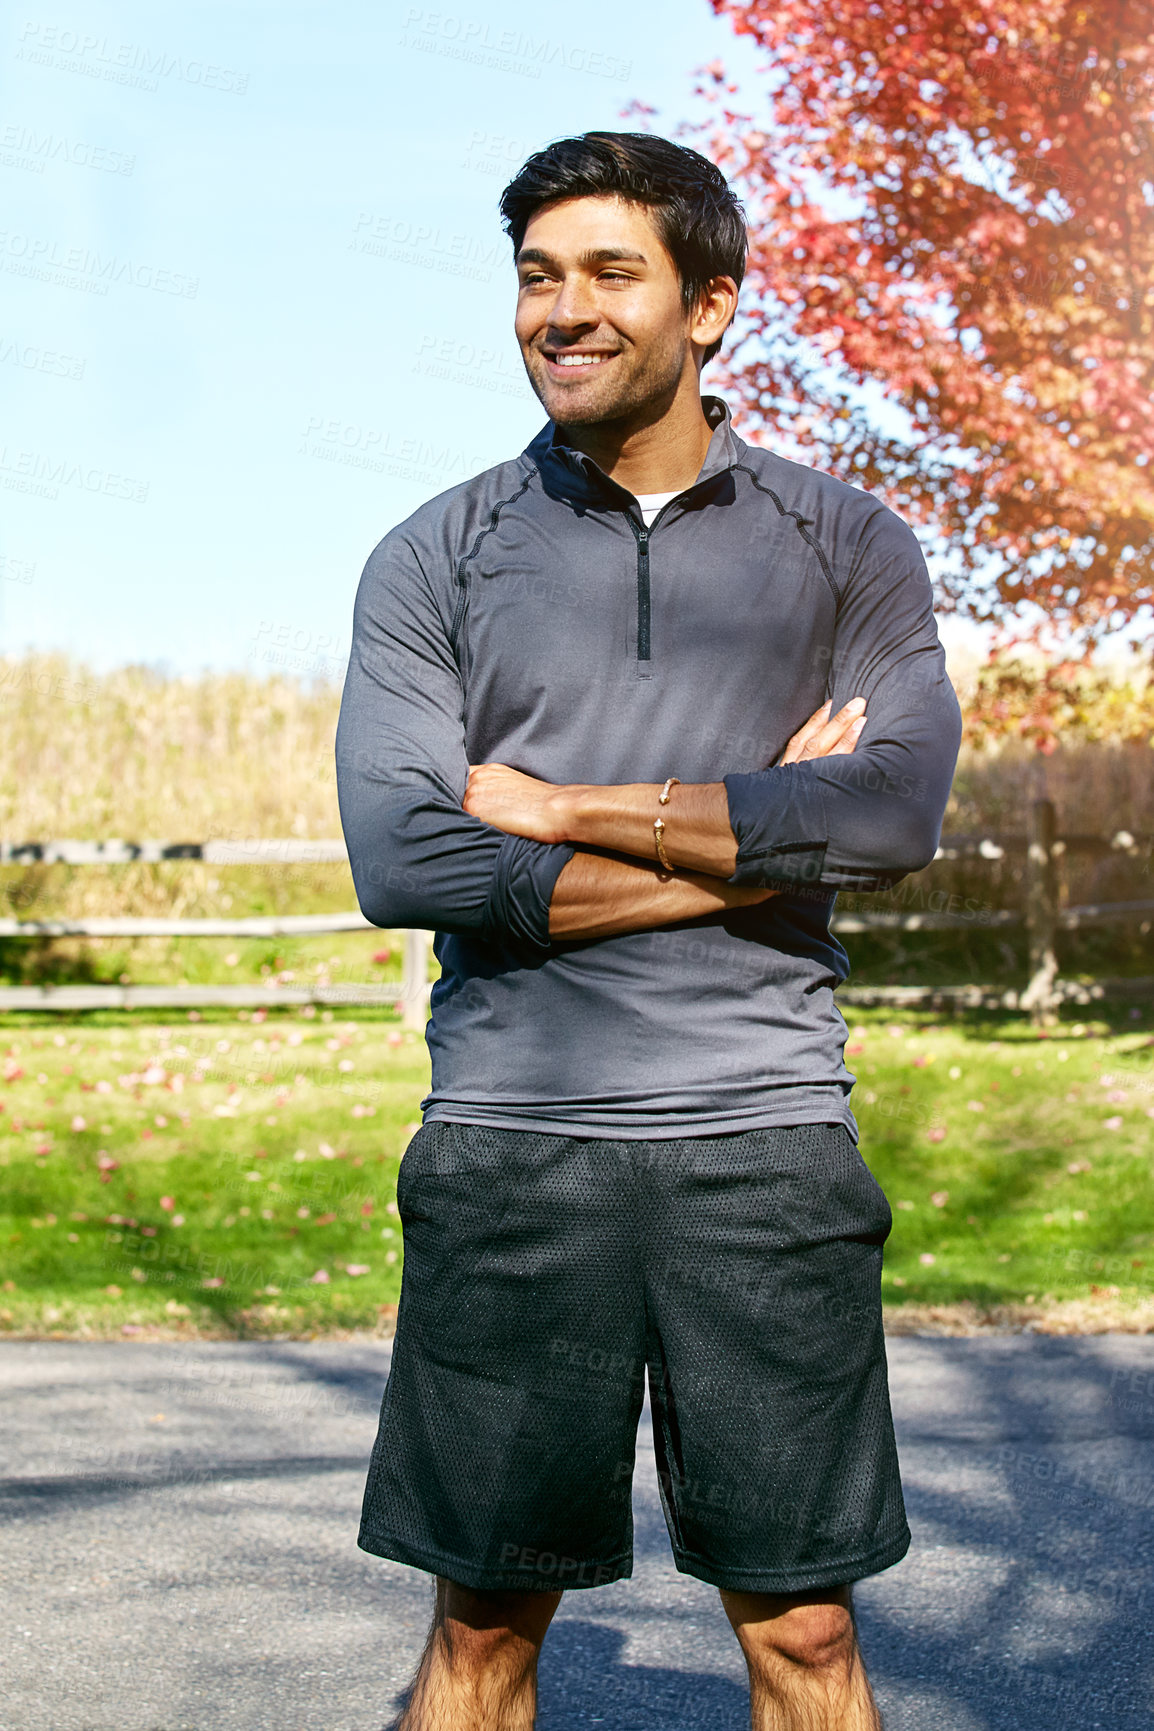 Buy stock photo Shot of a sporty young man standing outdoors